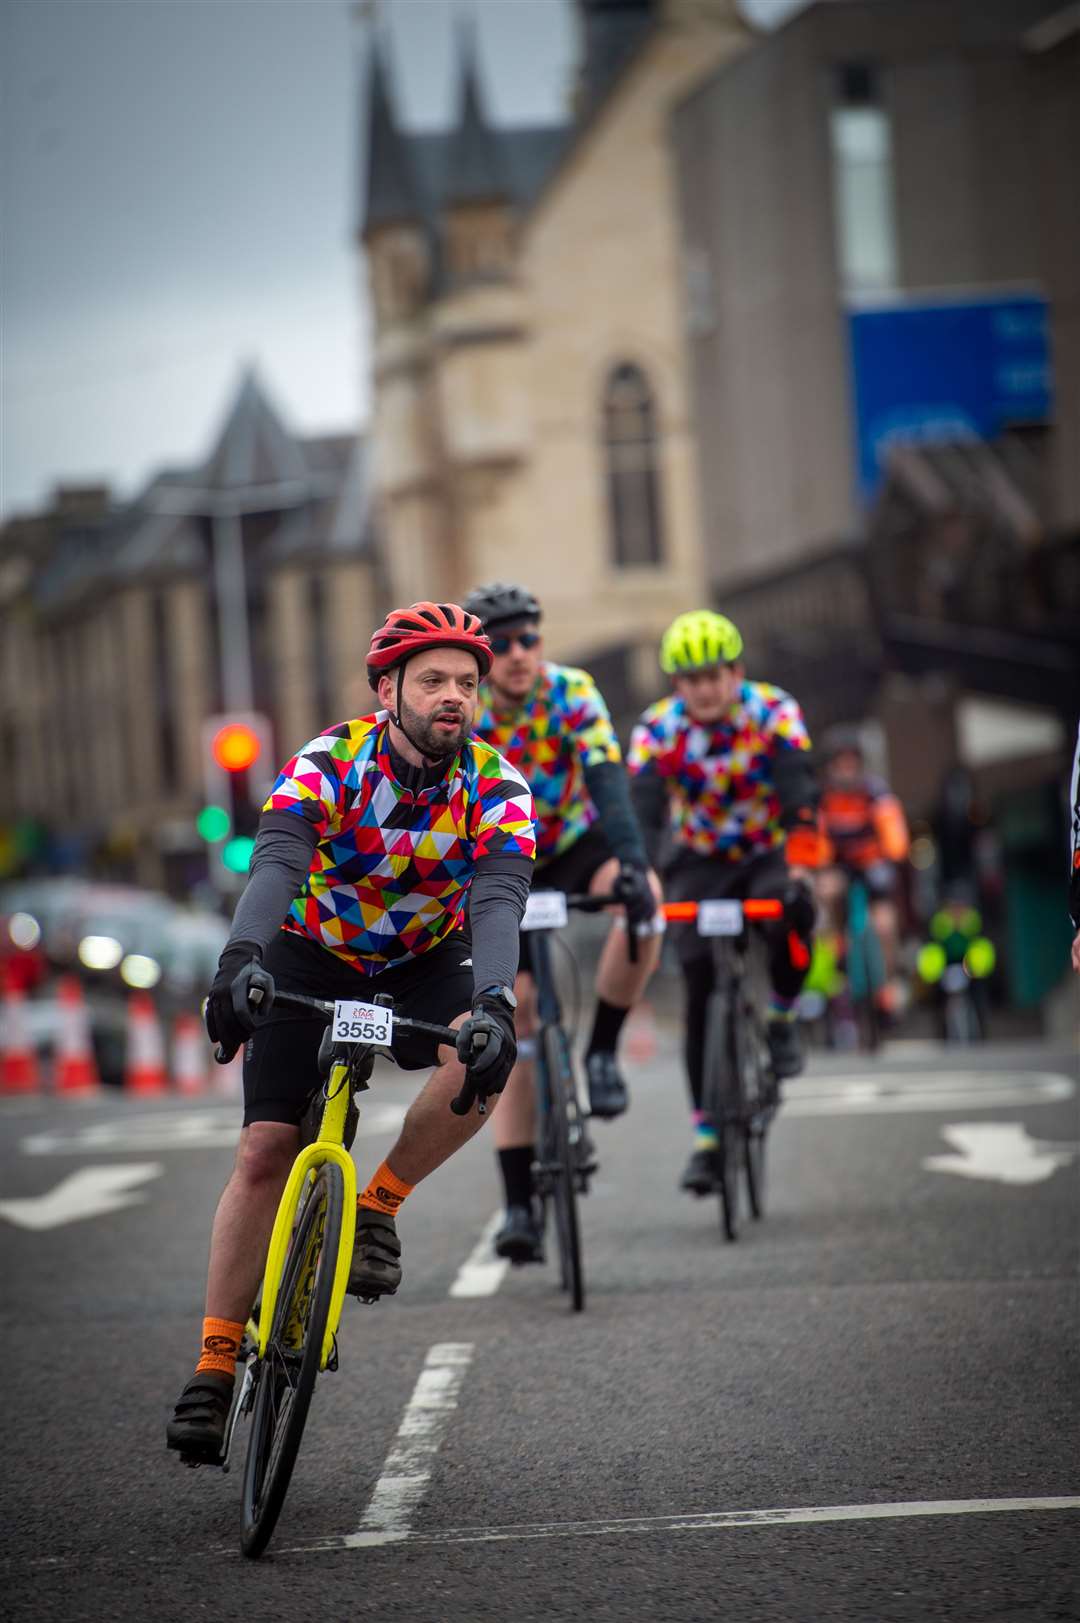 Cyclists coming through Inverness. Pictures: Callum Mackay